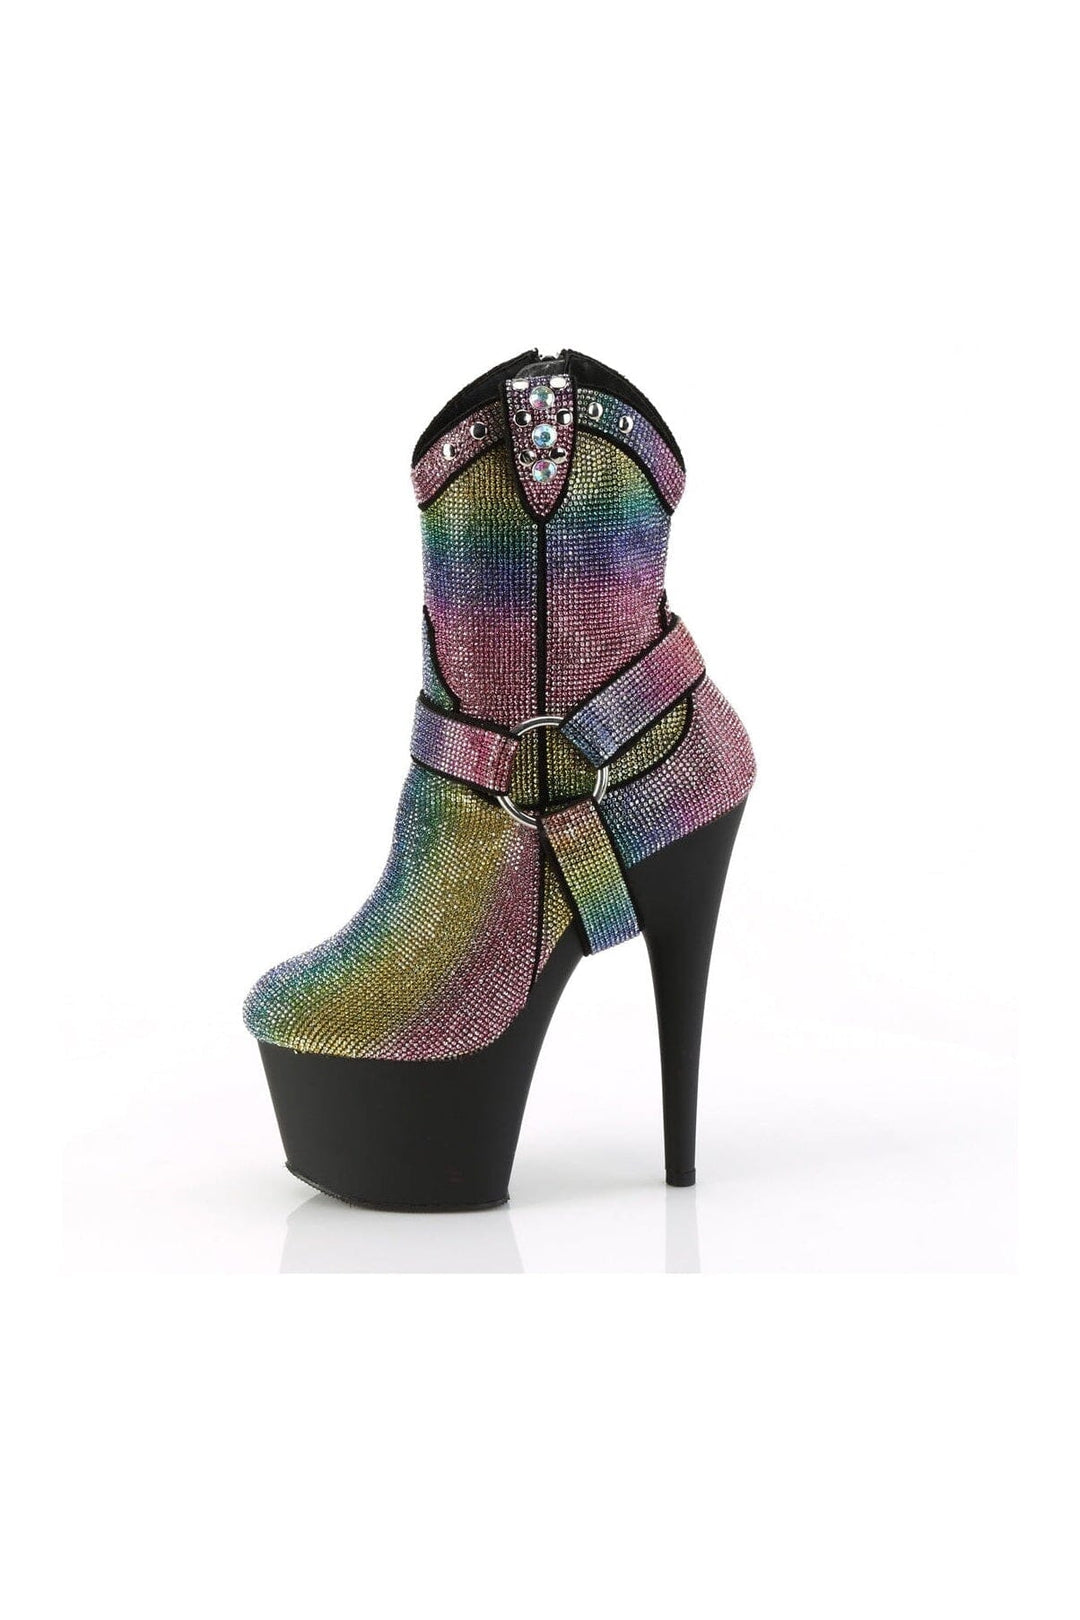 ADORE-1029RS Multi Faux Suede Ankle Boot-Ankle Boots-Pleaser-SEXYSHOES.COM